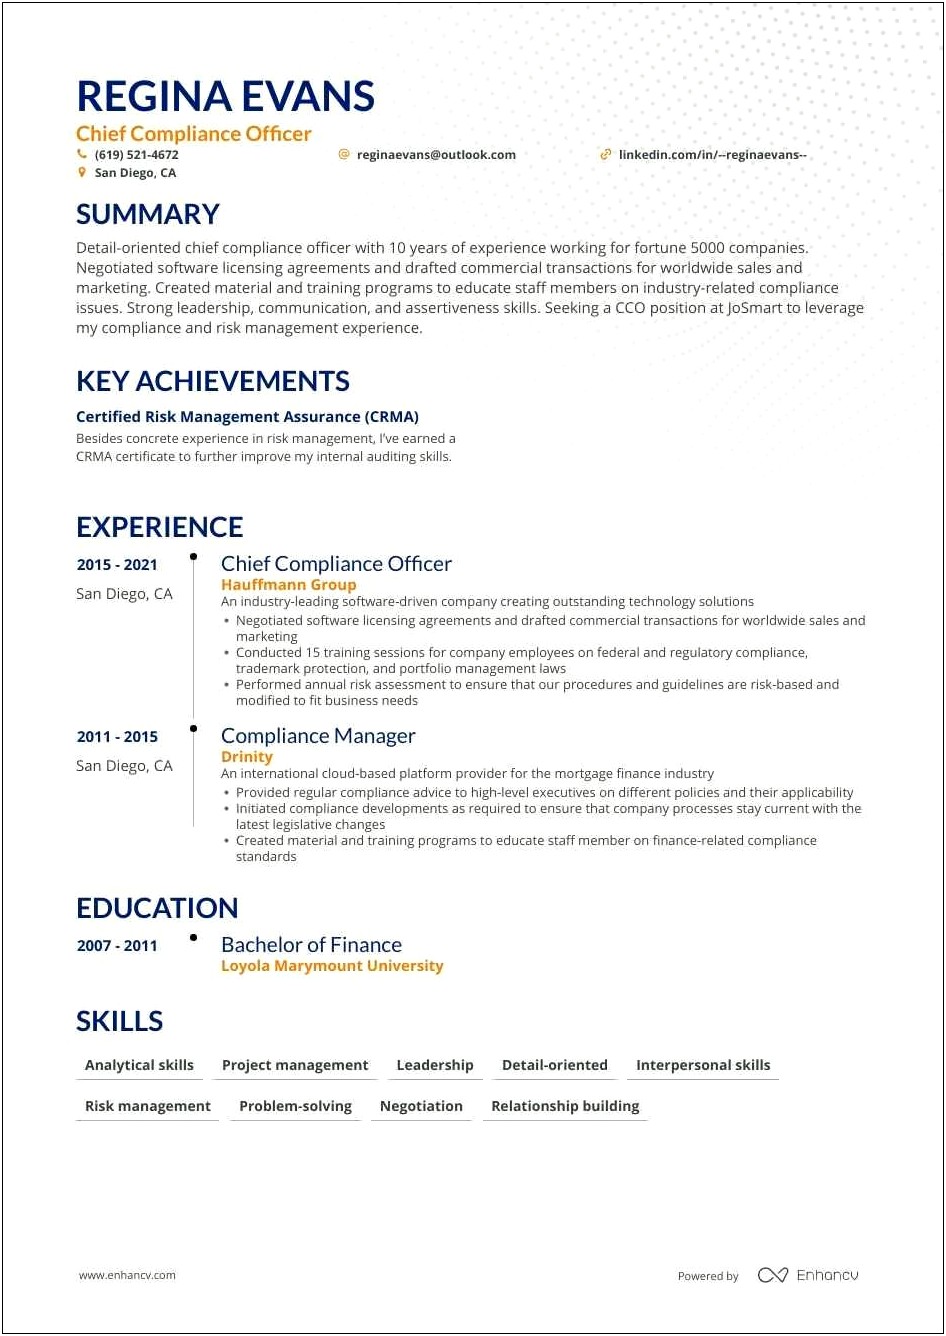 Chief Compliance Officer Resume Example